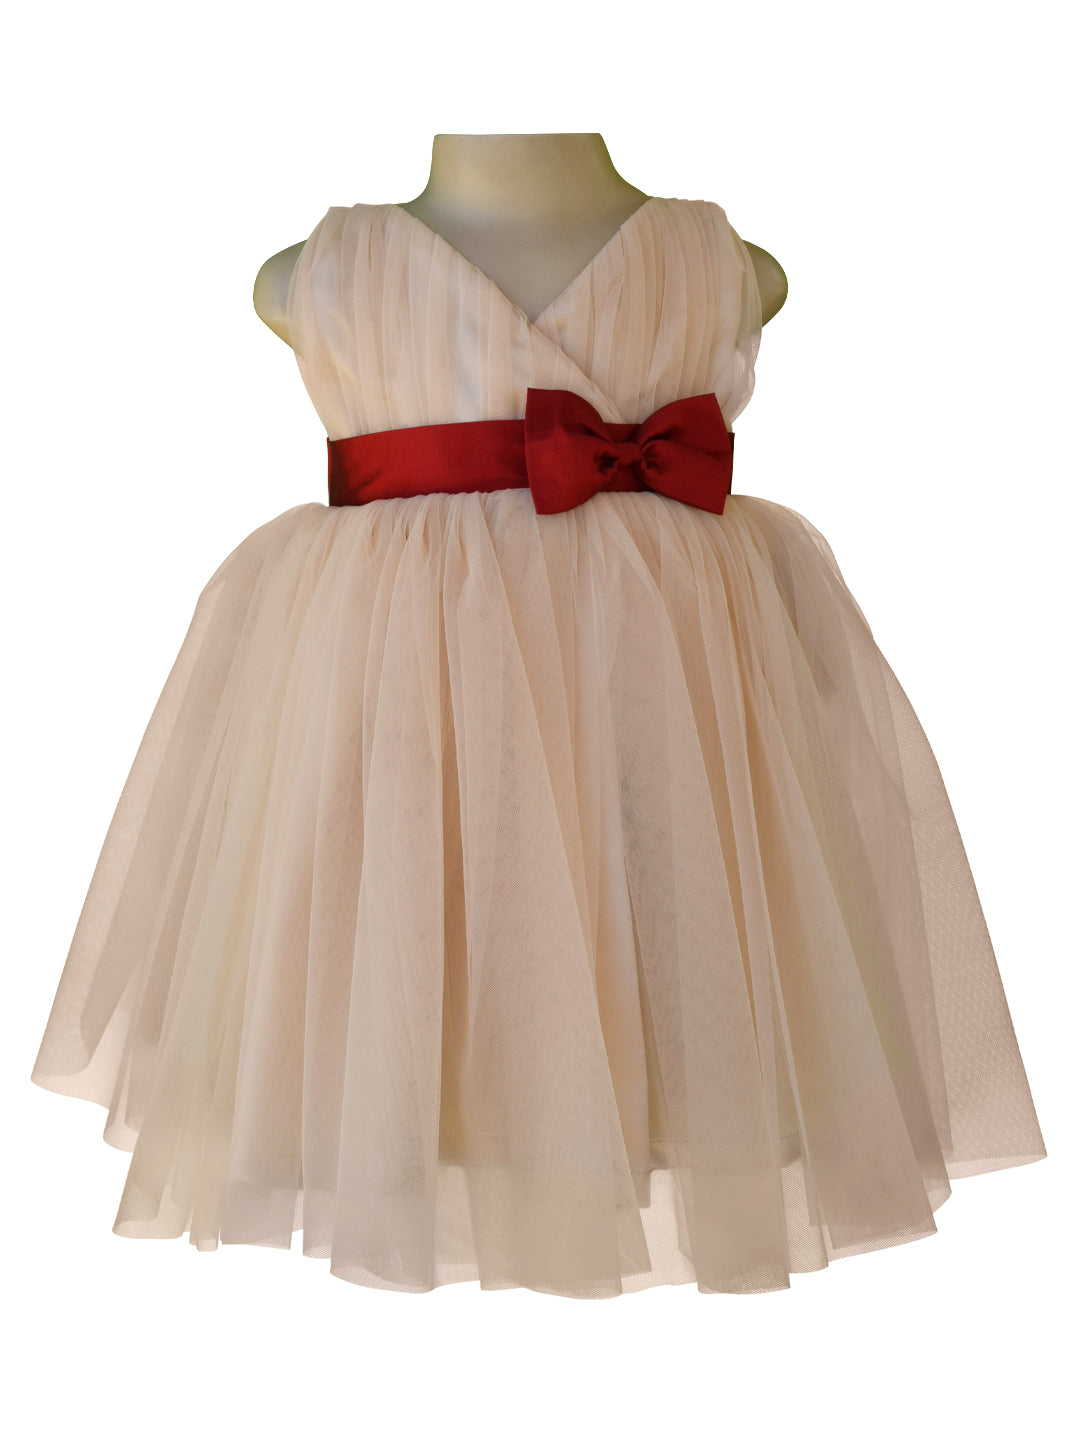 Sleeveless Red GirlS Party Wear Frock For Kids Size 1630